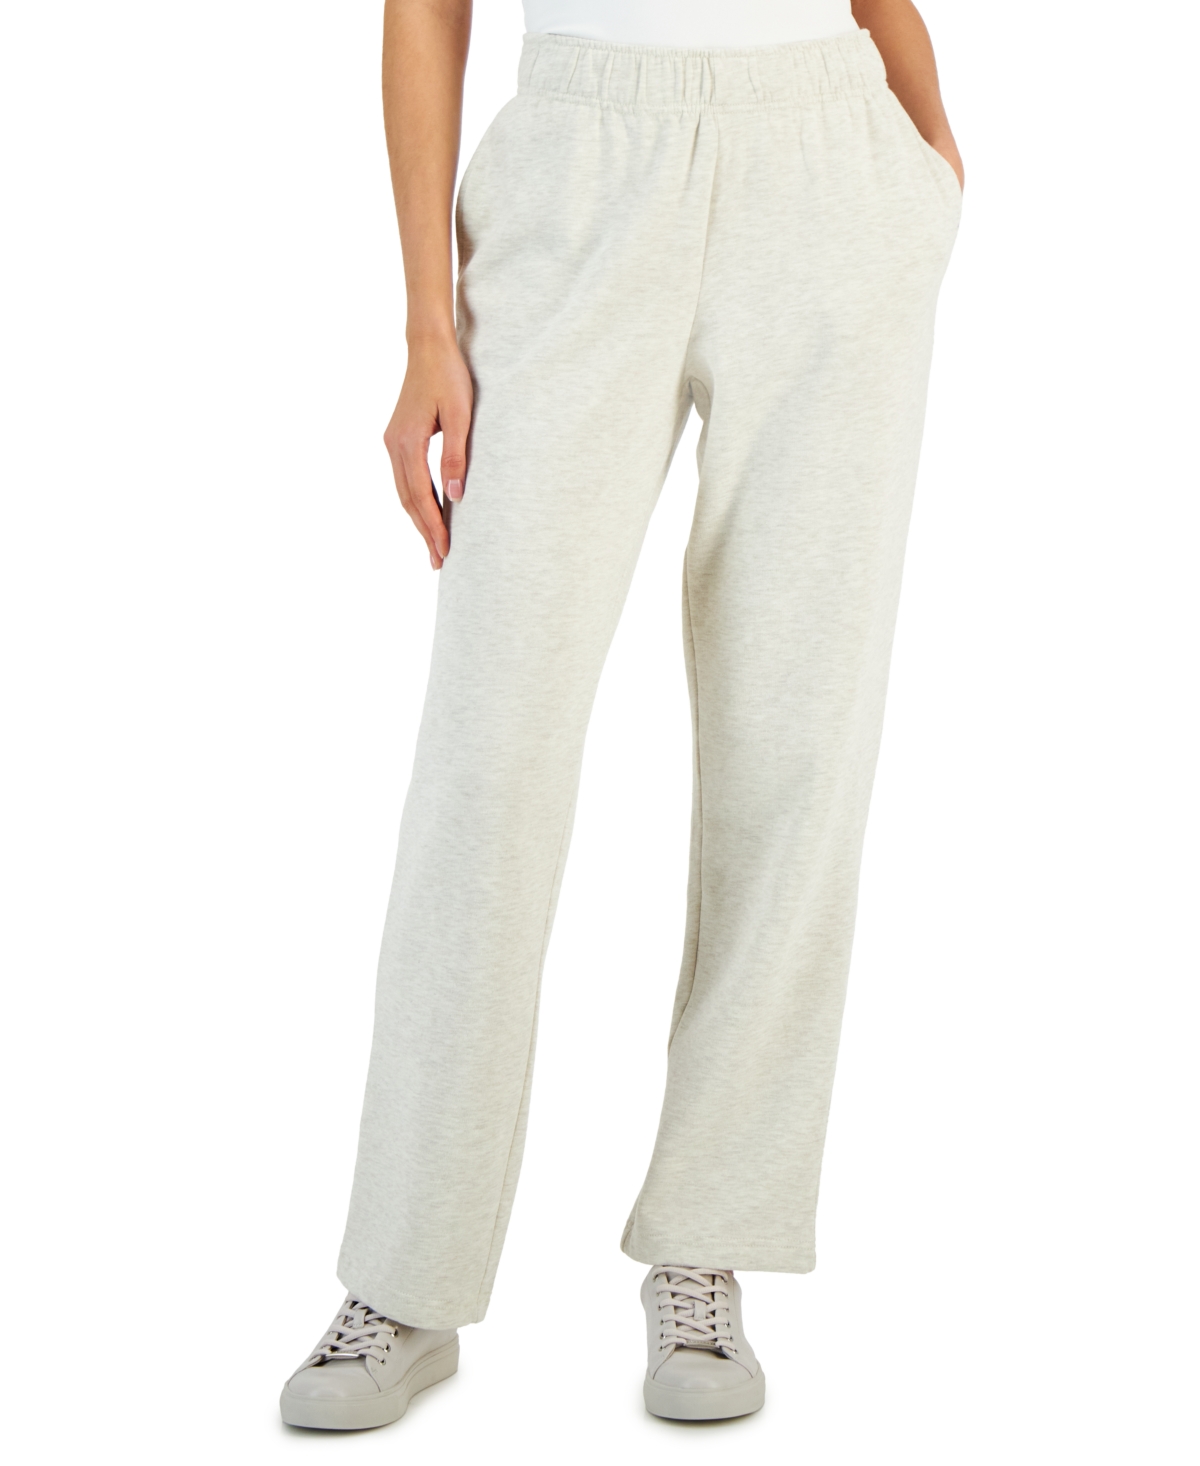 Women's Relaxed Wide-Leg Sweatpants, Created for Macy's - Light Sand Heather